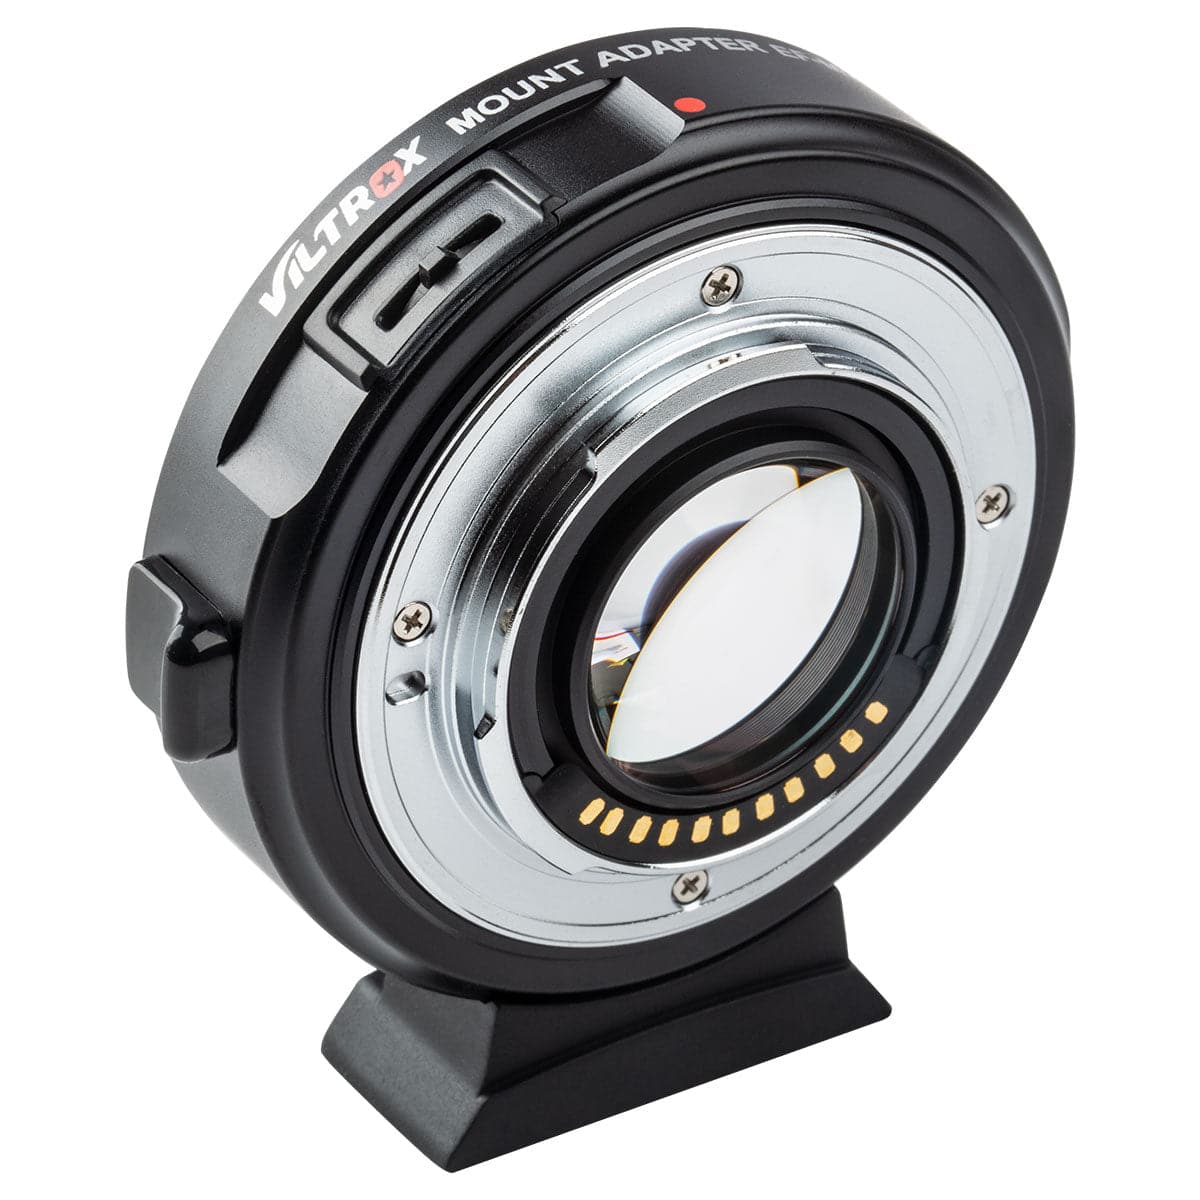 VILTROX EF-M2 II Focal Reducer Speed Booster Adapterfor Canon EF Mount Series Lens to M43 Camera